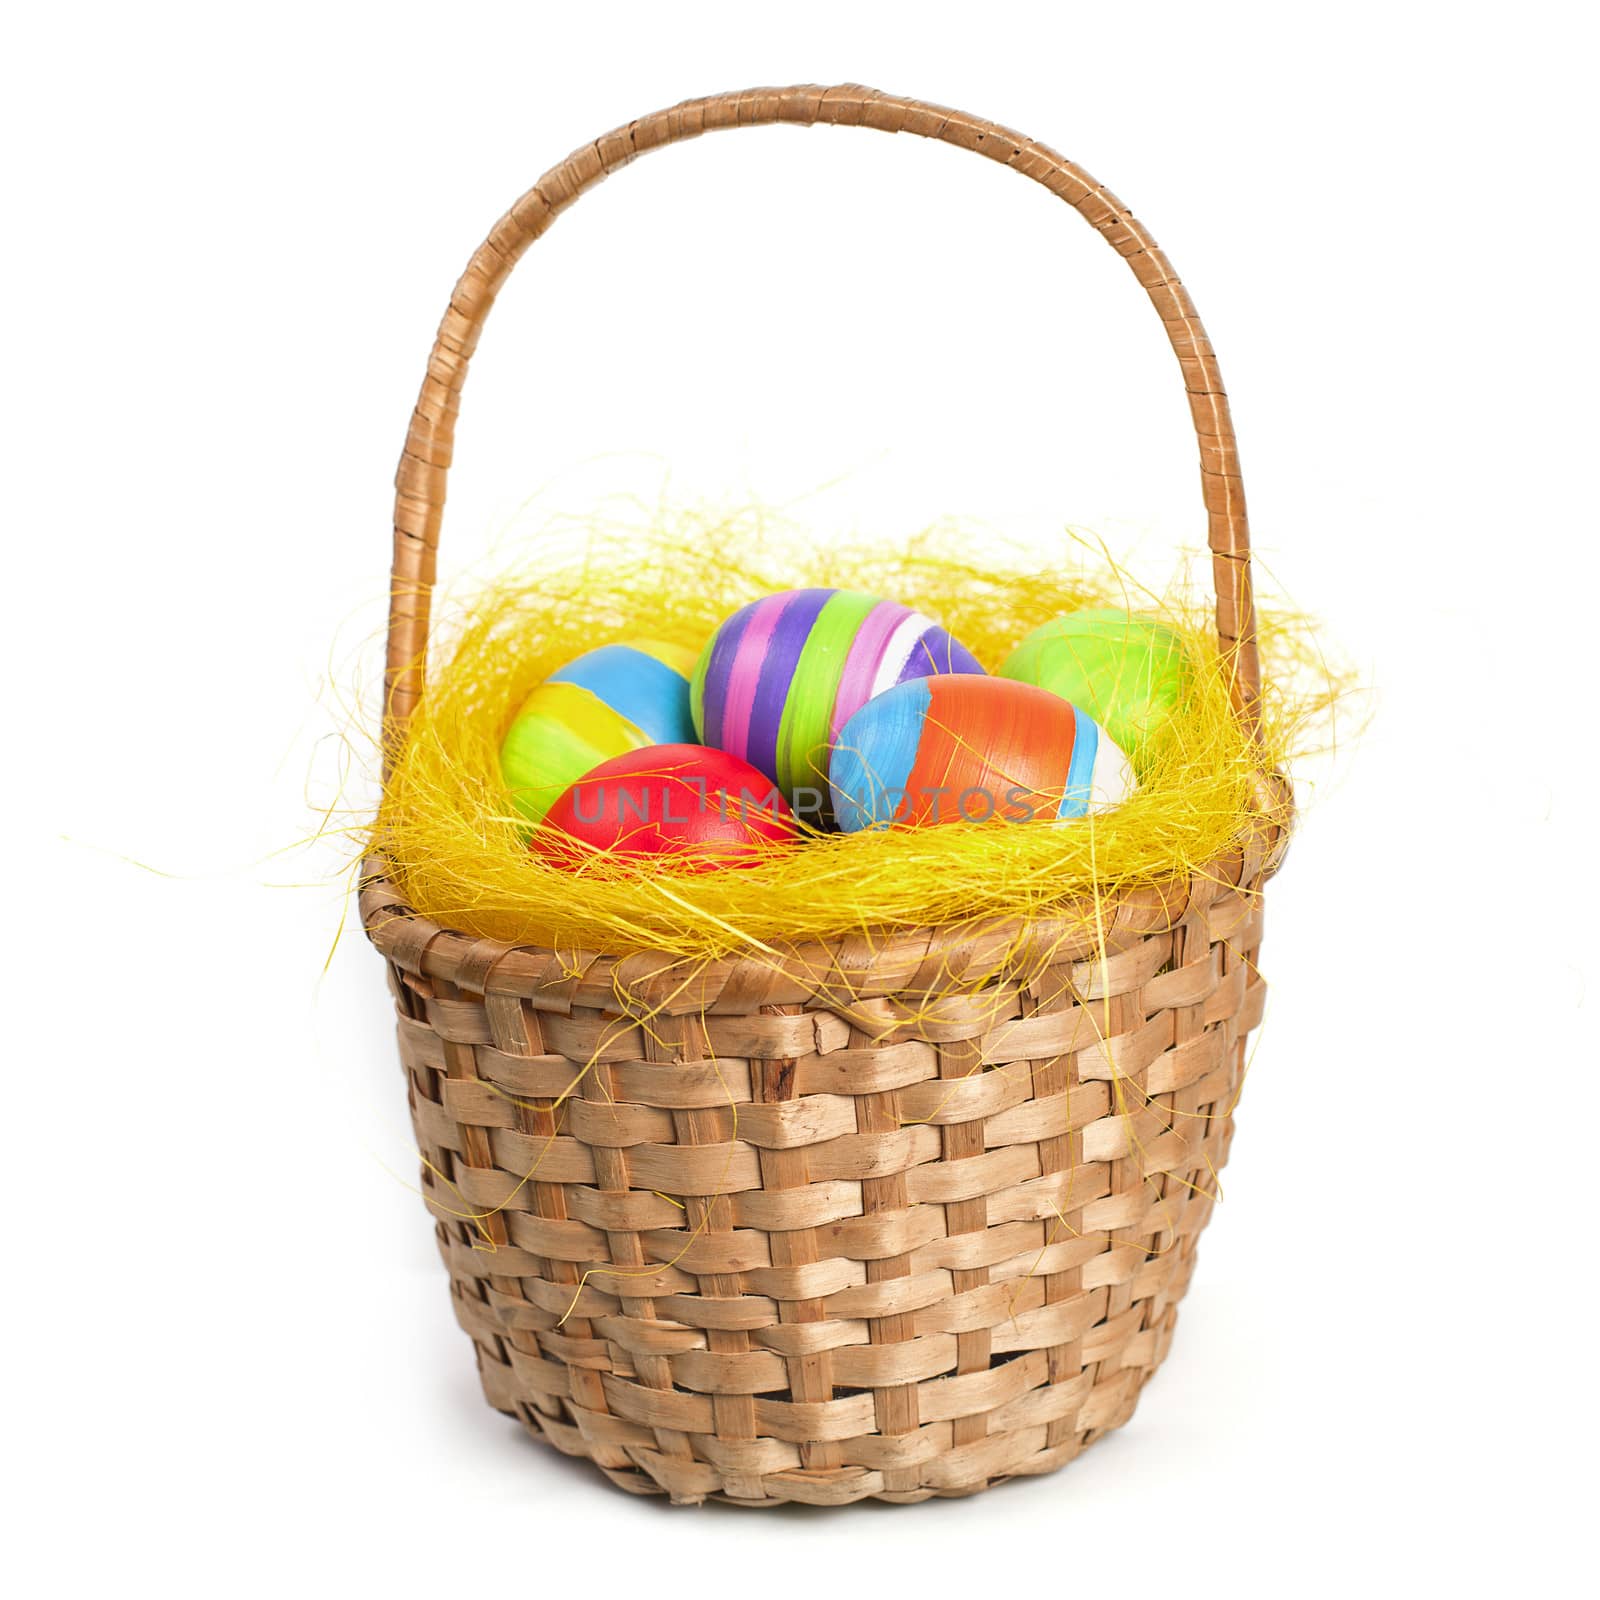 Easter eggs in a basket by Kor